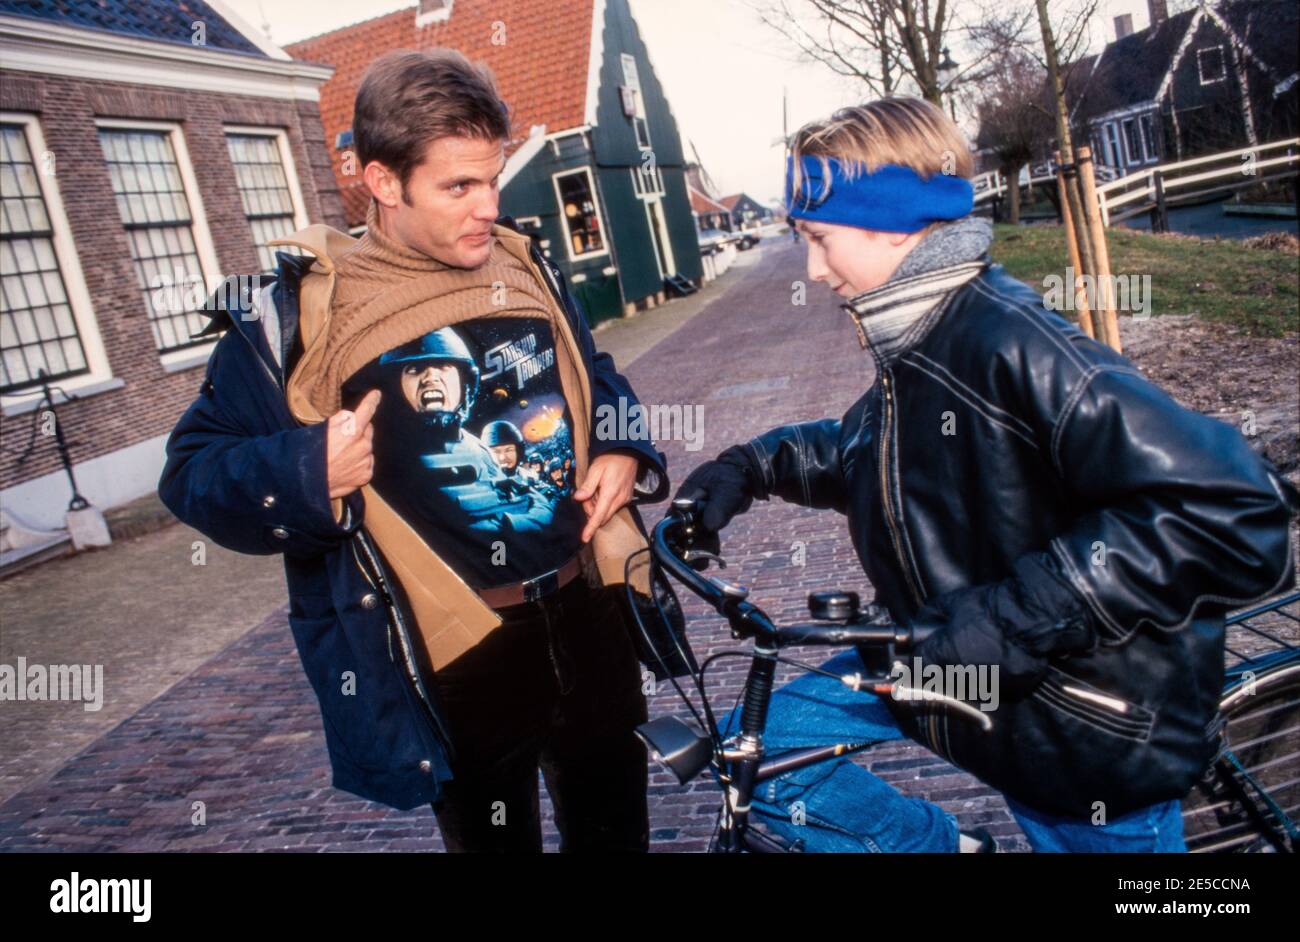 ZAANSE SCHANS, THE NETHERLANDS, DEC 19, 1997: Actor Casper van Dien on ice in the Netherlands in front of a mill during a promotion tour of the movie Stock Photo